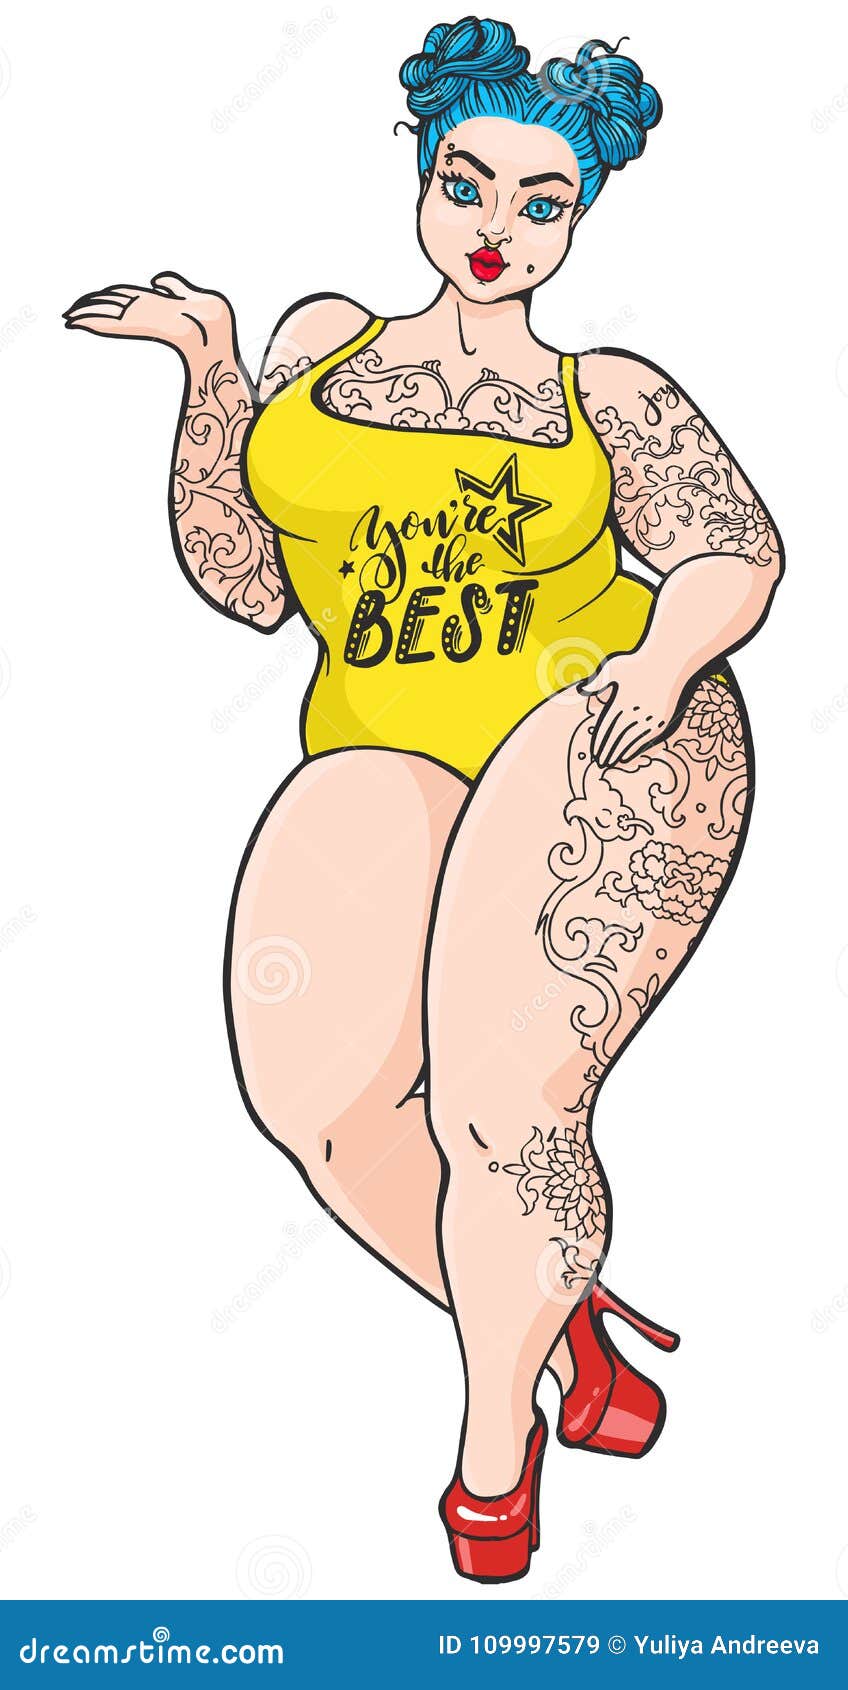 Curvy Plump Cartoon Girl in Pop Art Style. Vector Isolated Plus Size Woman with Tattoos and Blue Hair Stock Illustration - Illustration of fashion, form: 109997579